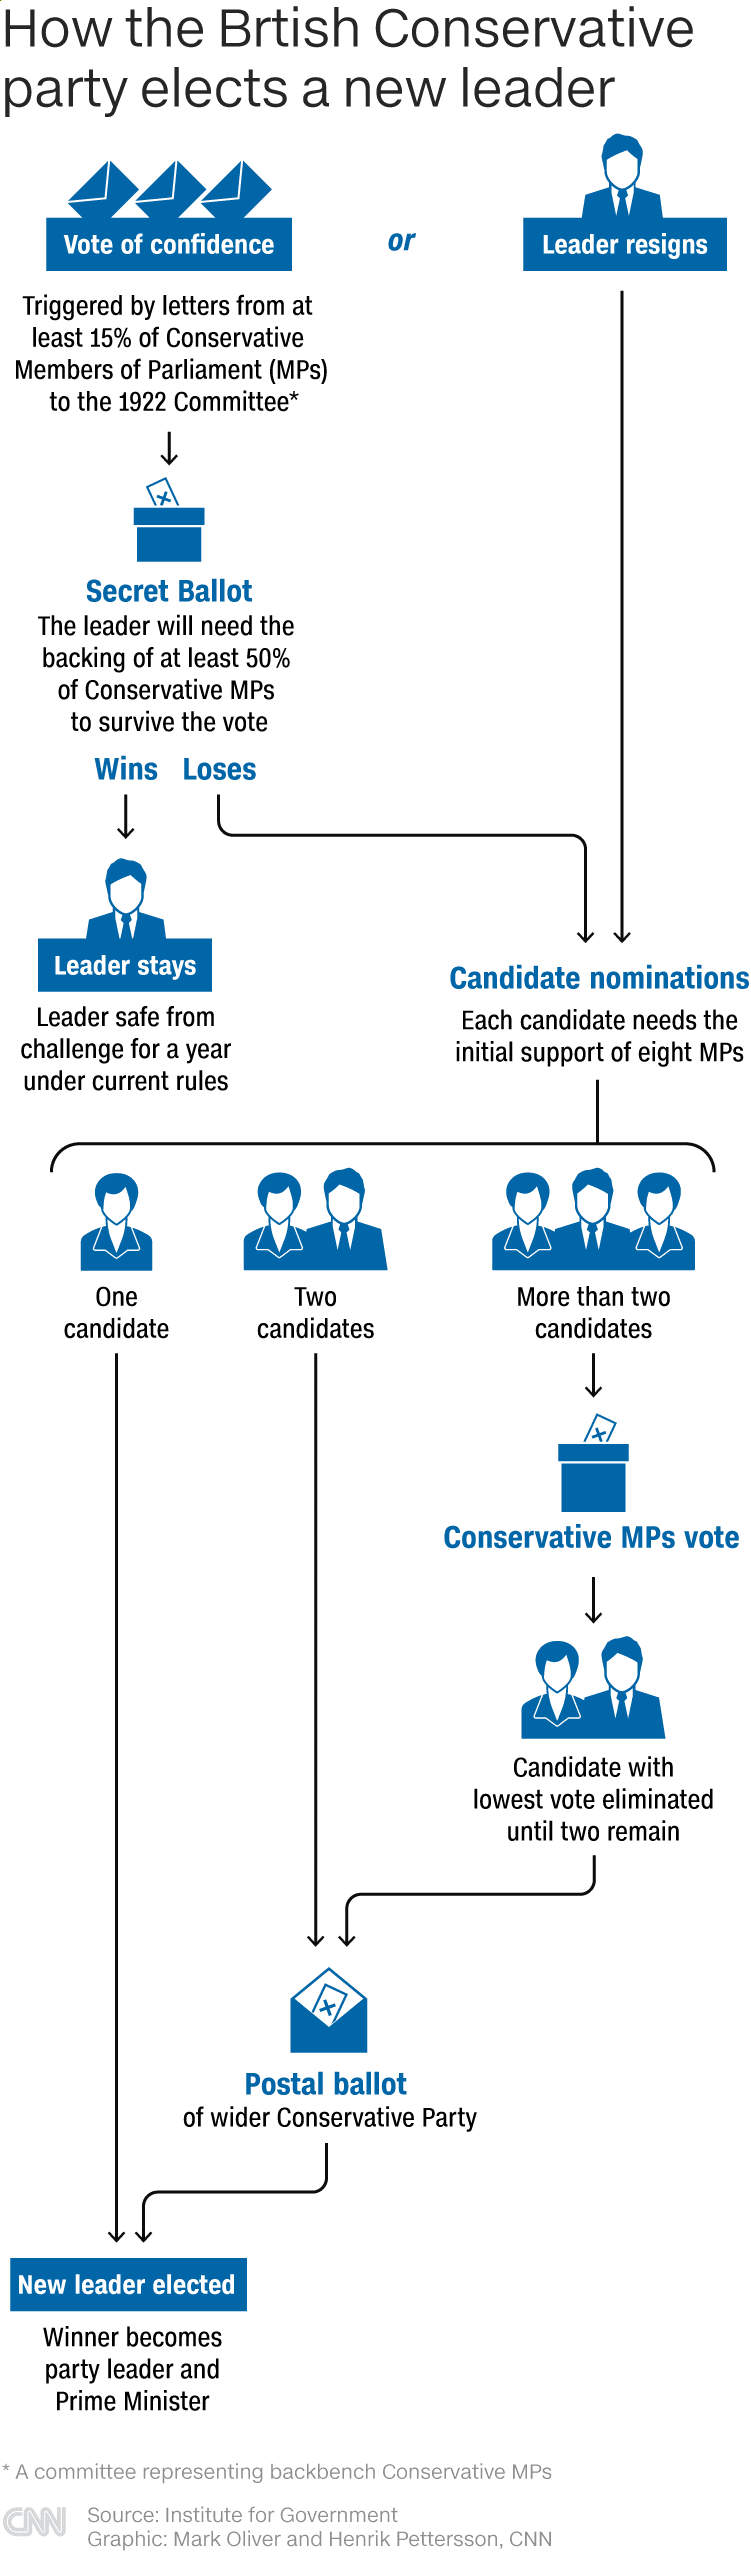 How Britain's Conservative Party elects a new leader